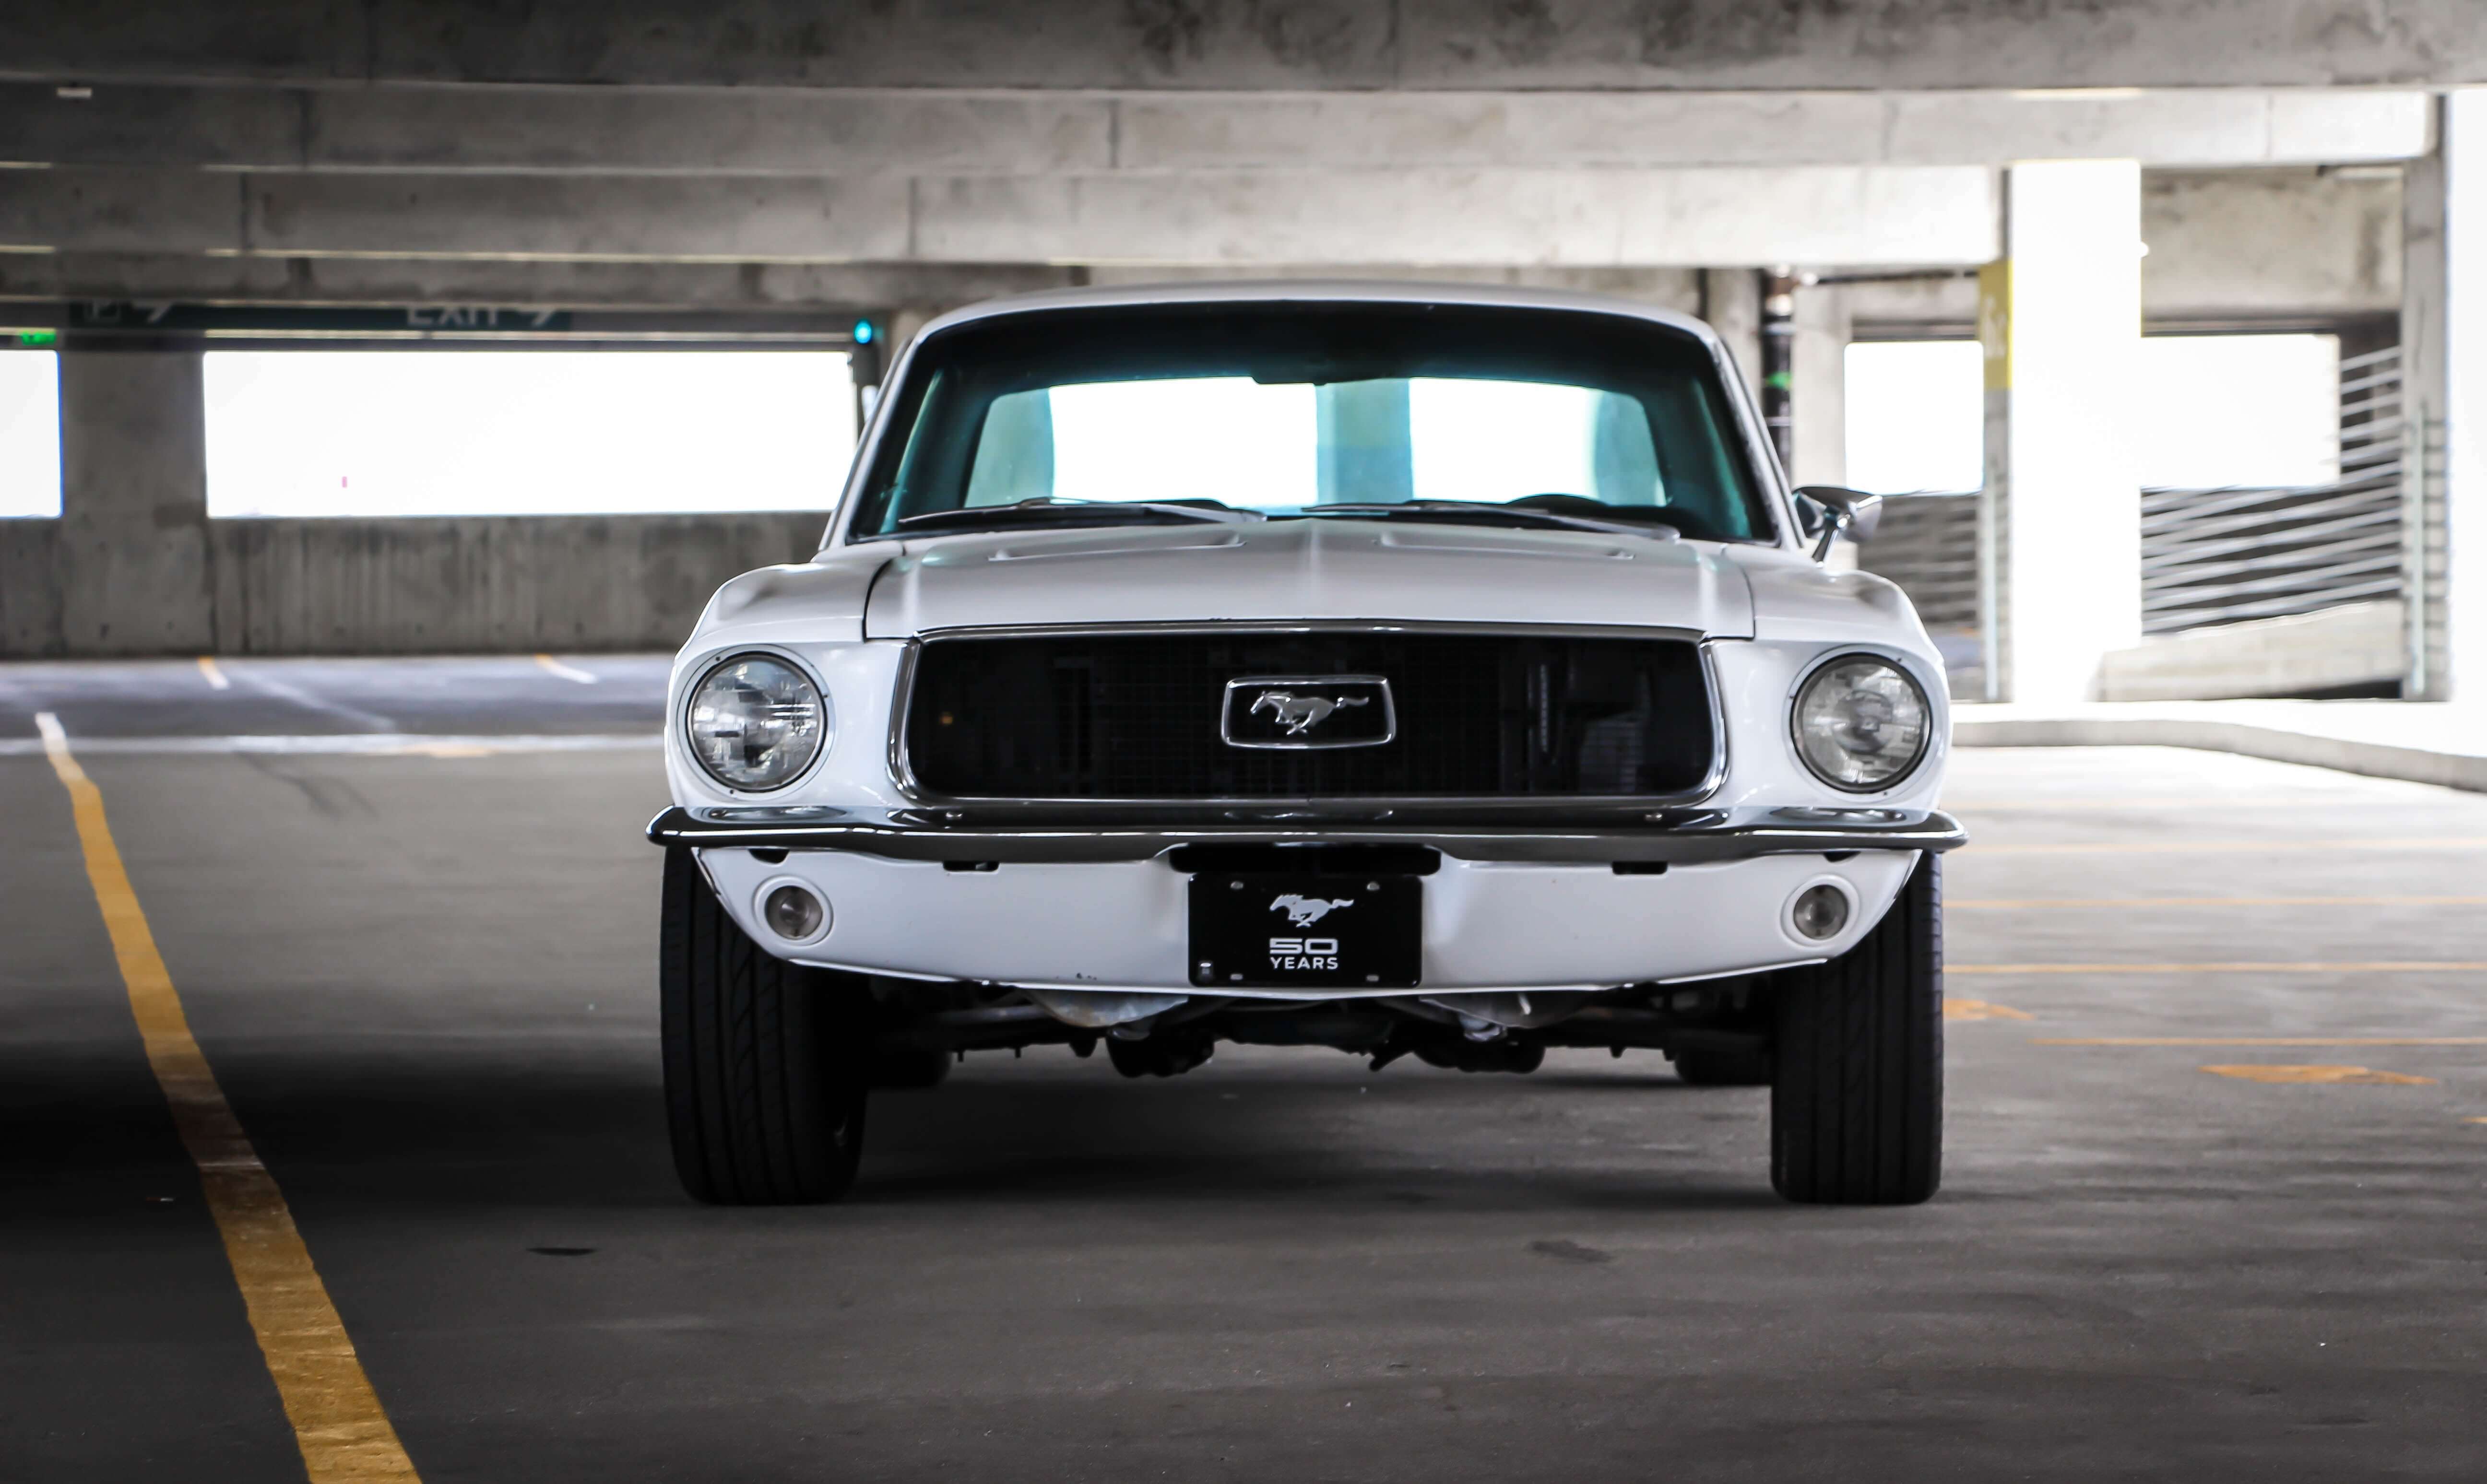 A Mustang accelerates fast